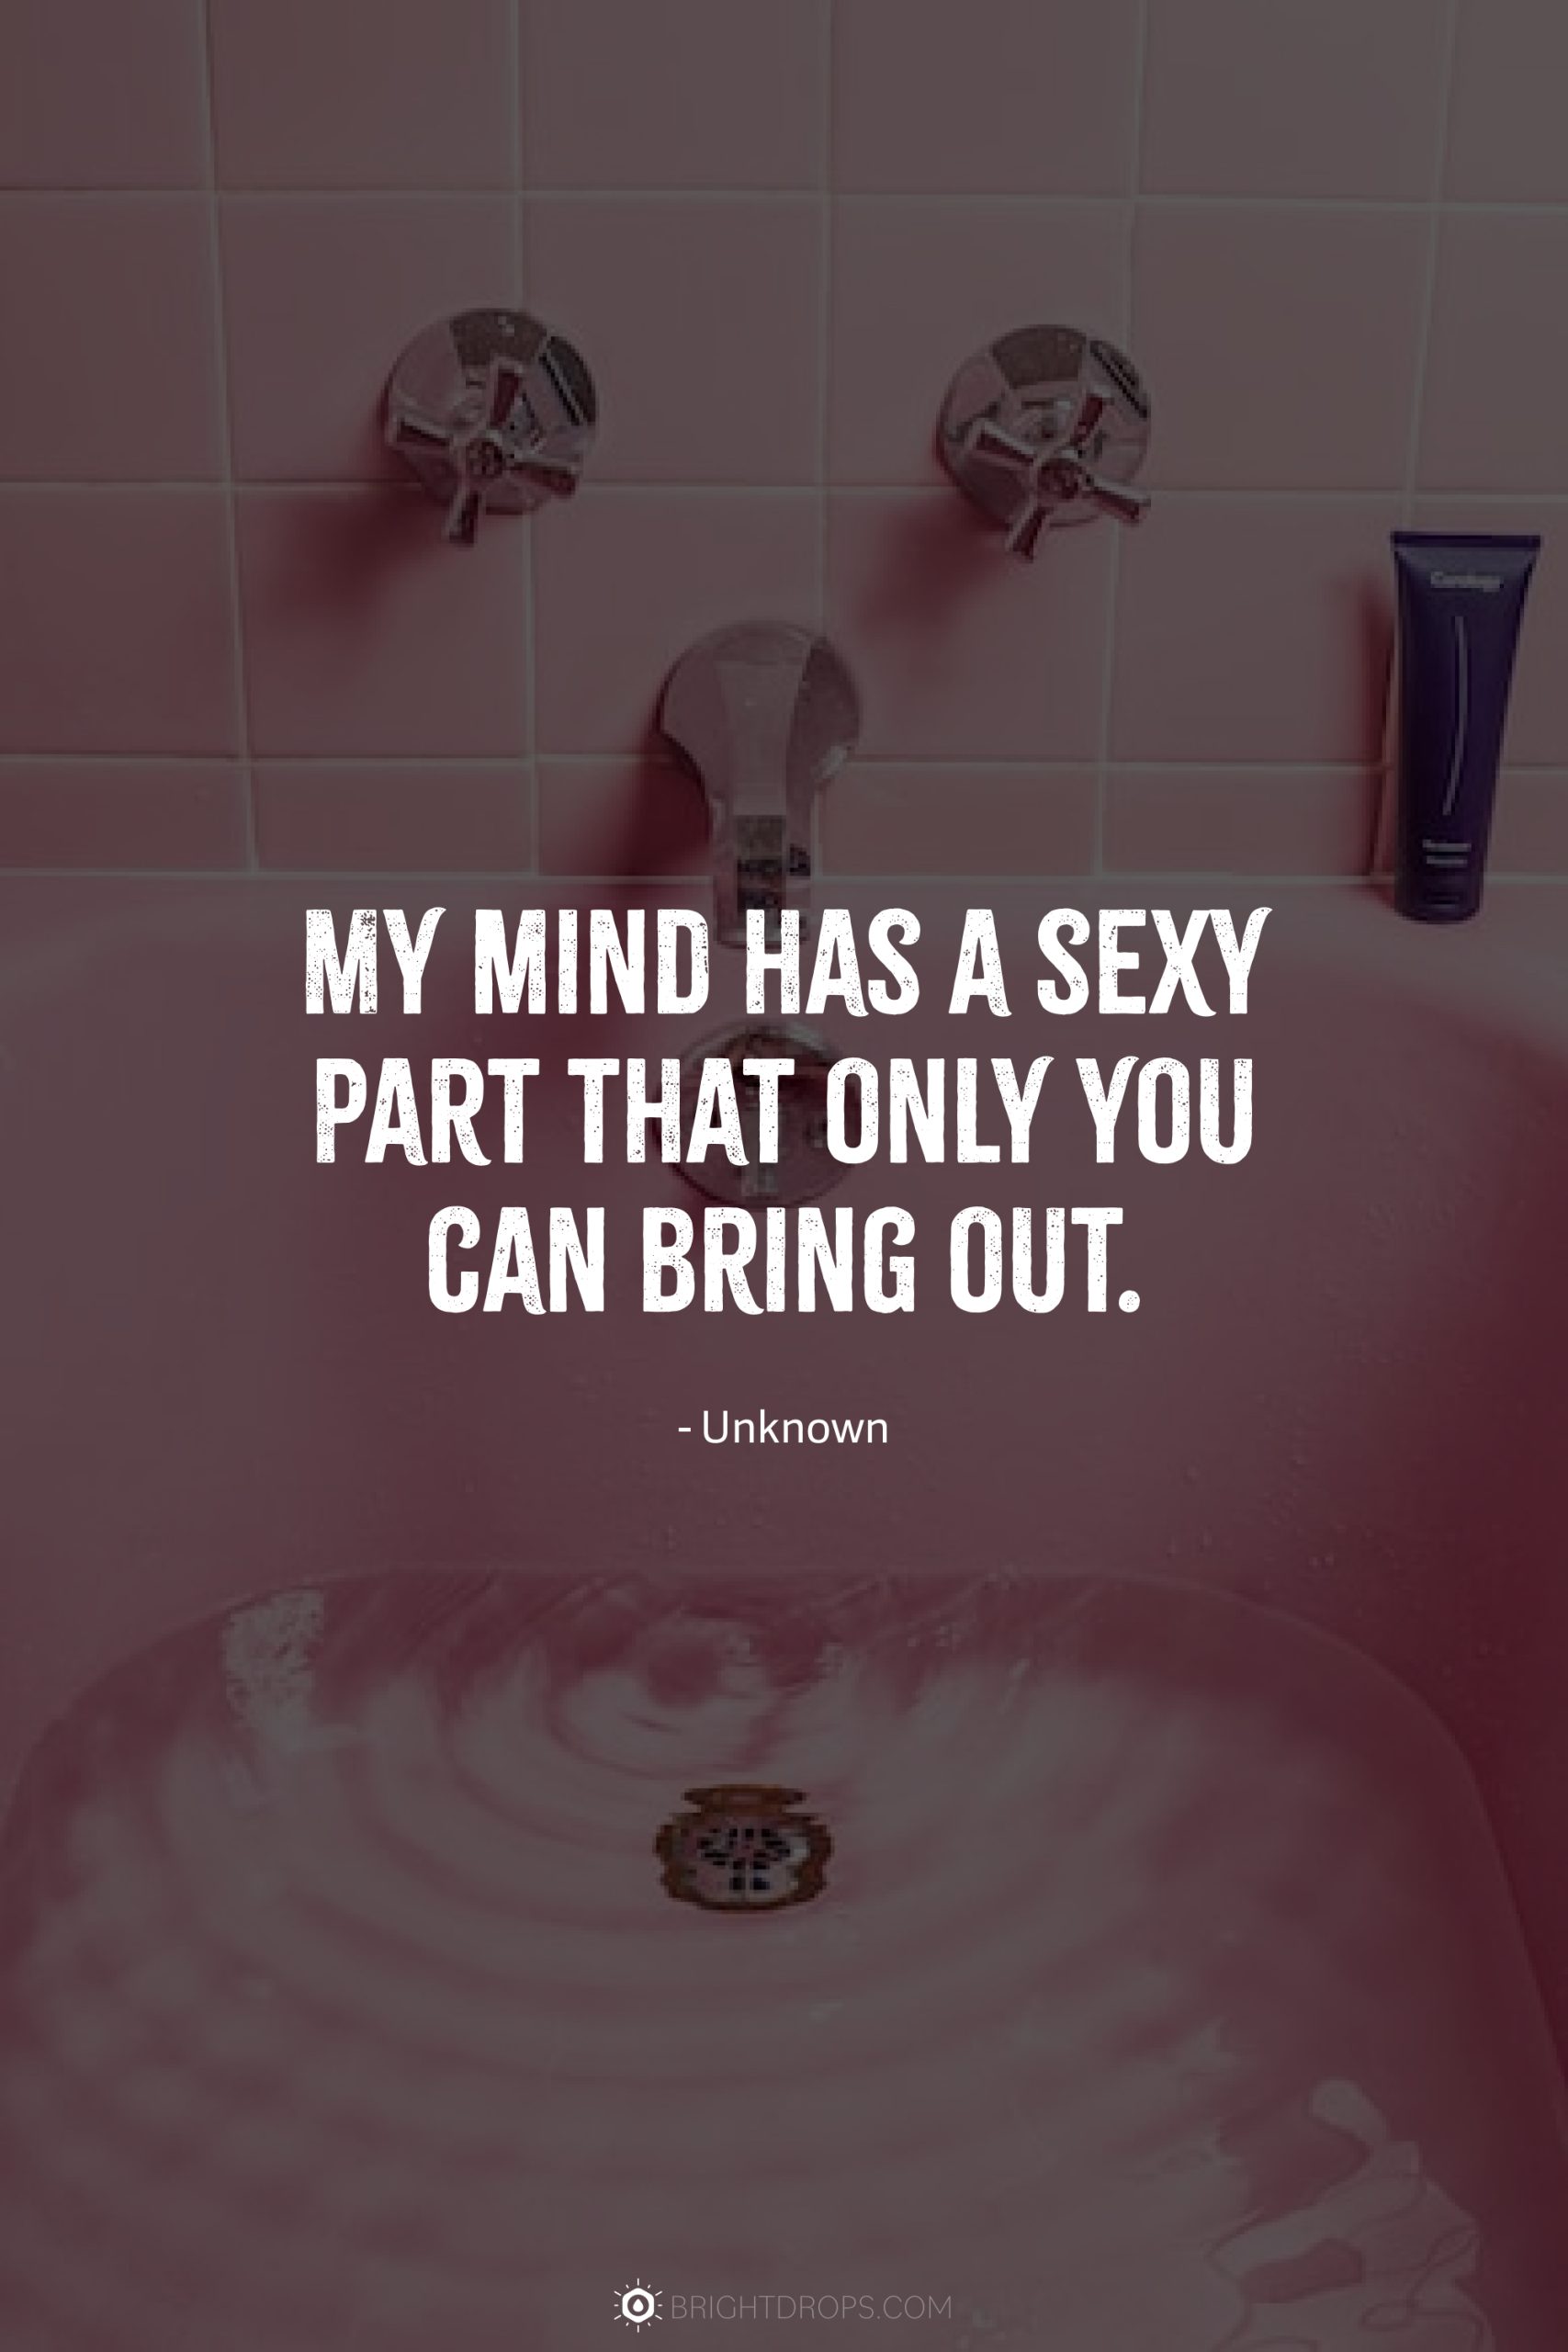 My mind has a sexy part that only you can bring out.